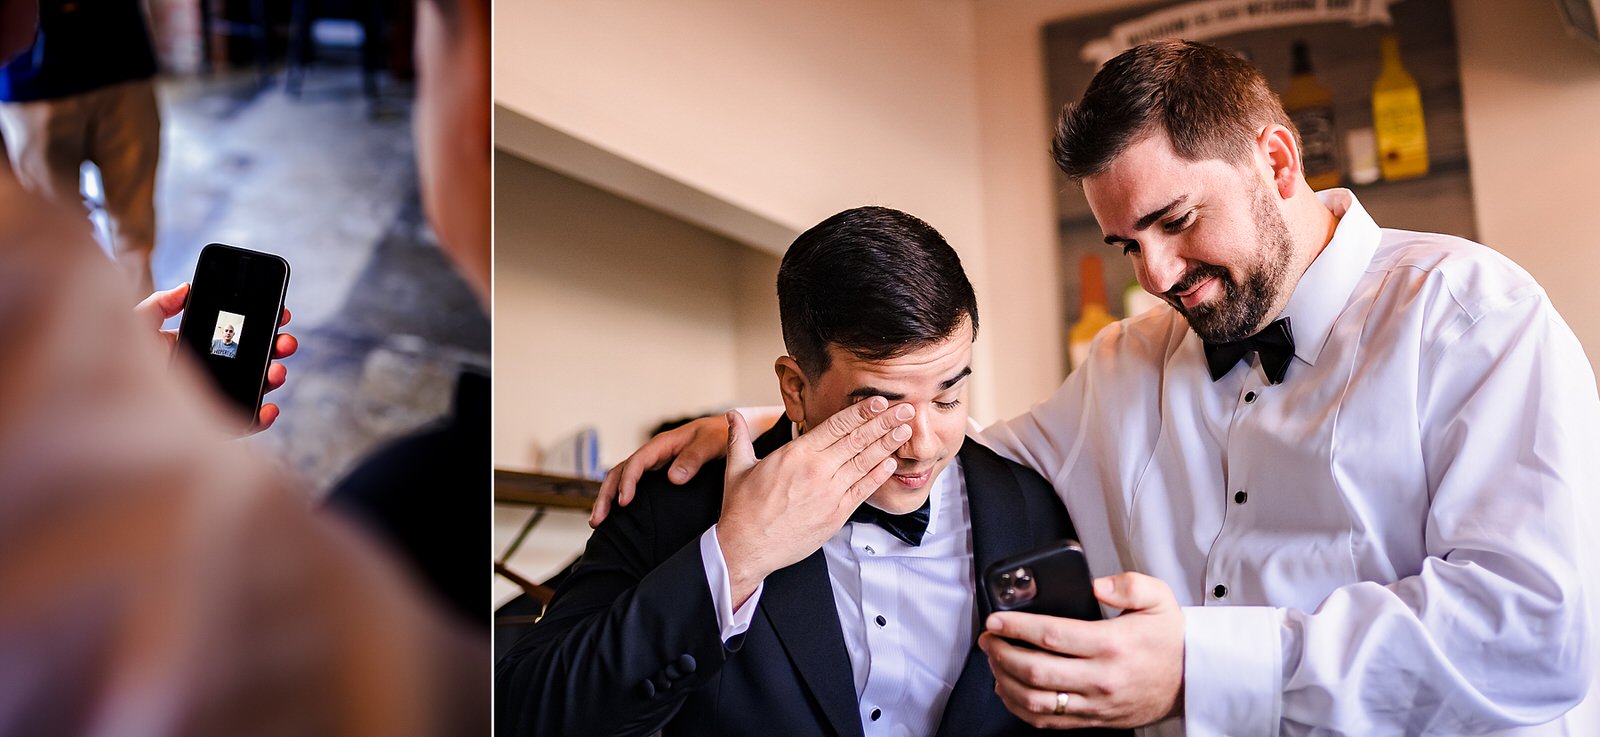 Some of the groomsmen couldn't make it to this wedding because of Covid and the bride surprised the groom with video messages from his friends!